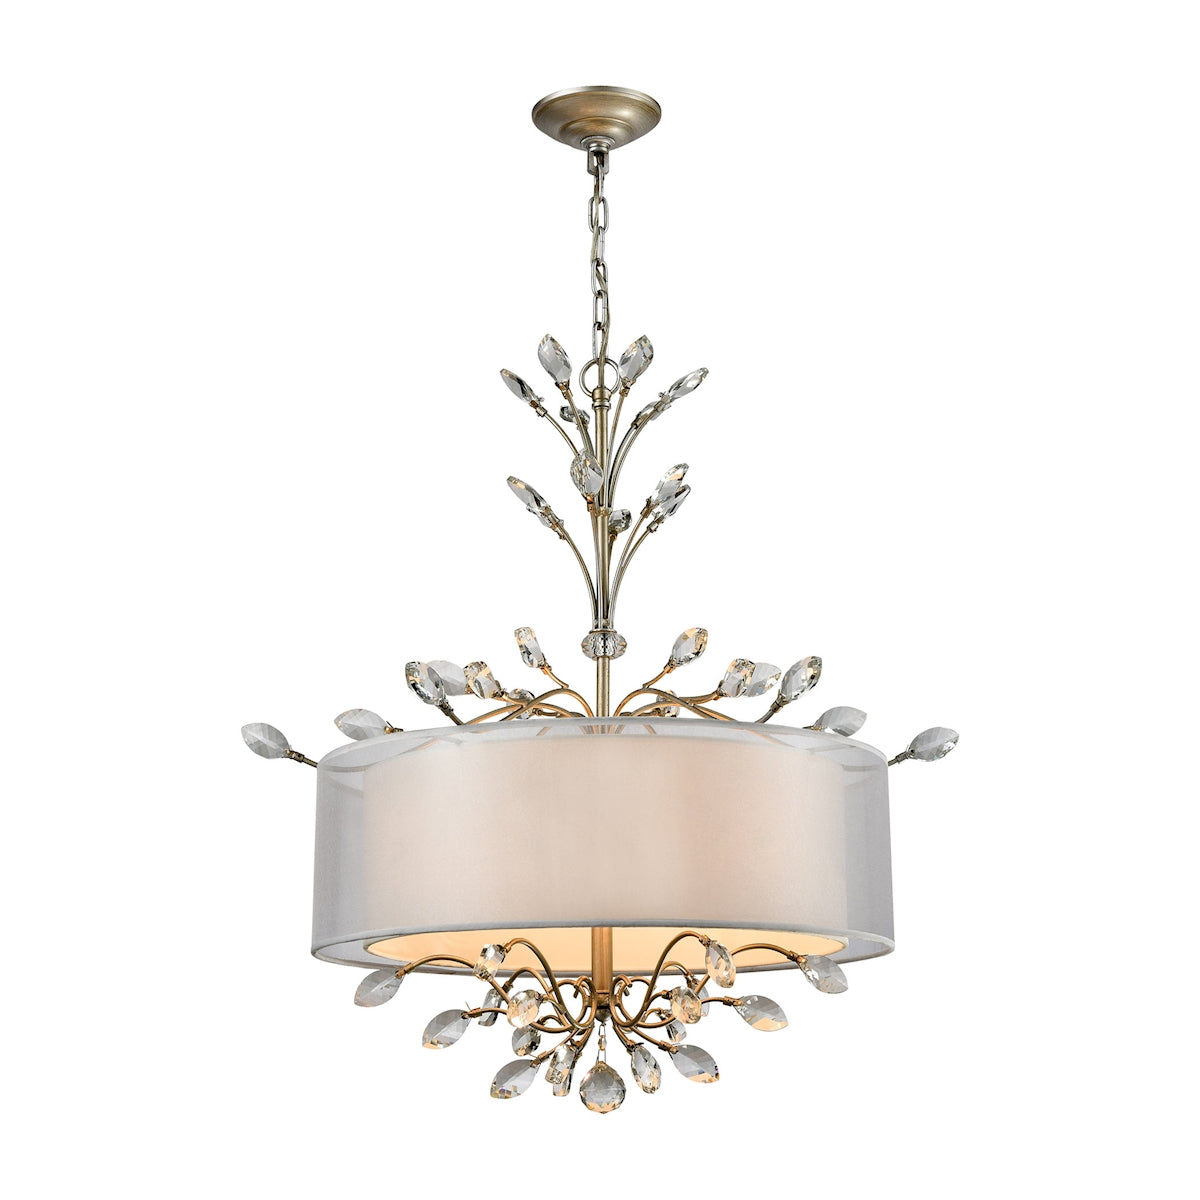 ELK Lighting 16282/4 - Asbury 26" Wide 4-Light Chandelier with Organza and White Fabric Shade in Age